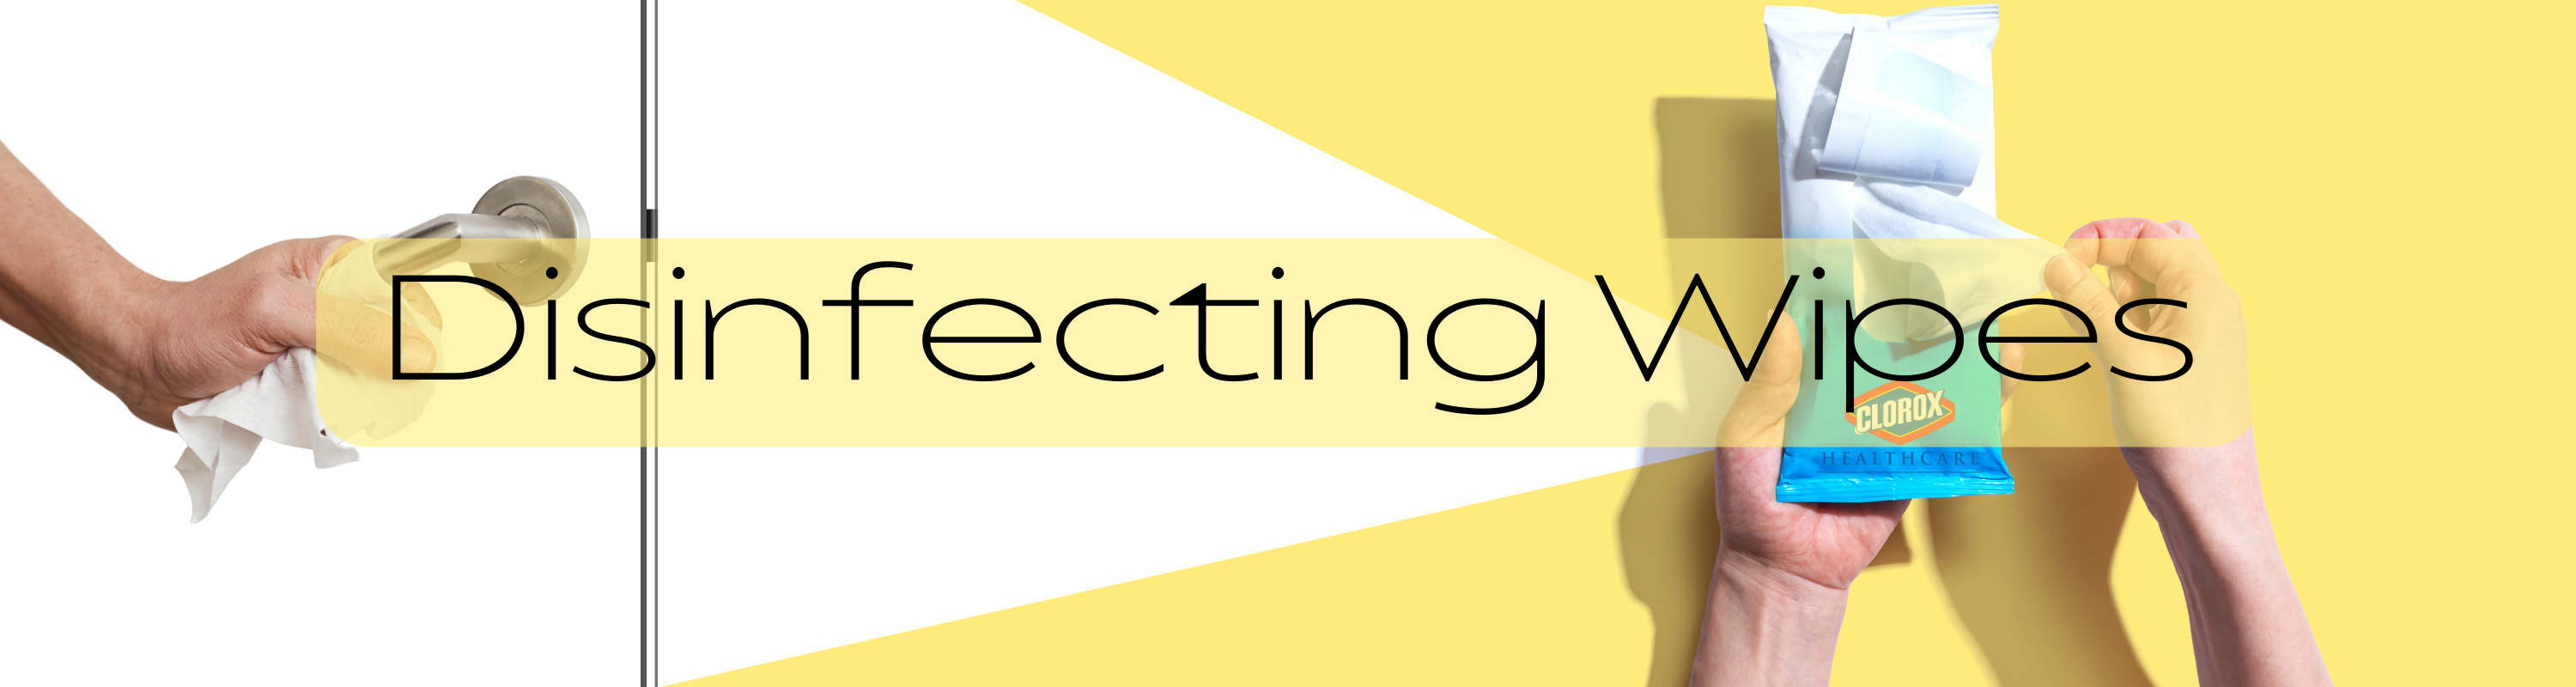 Disinfecting Wipes Banner